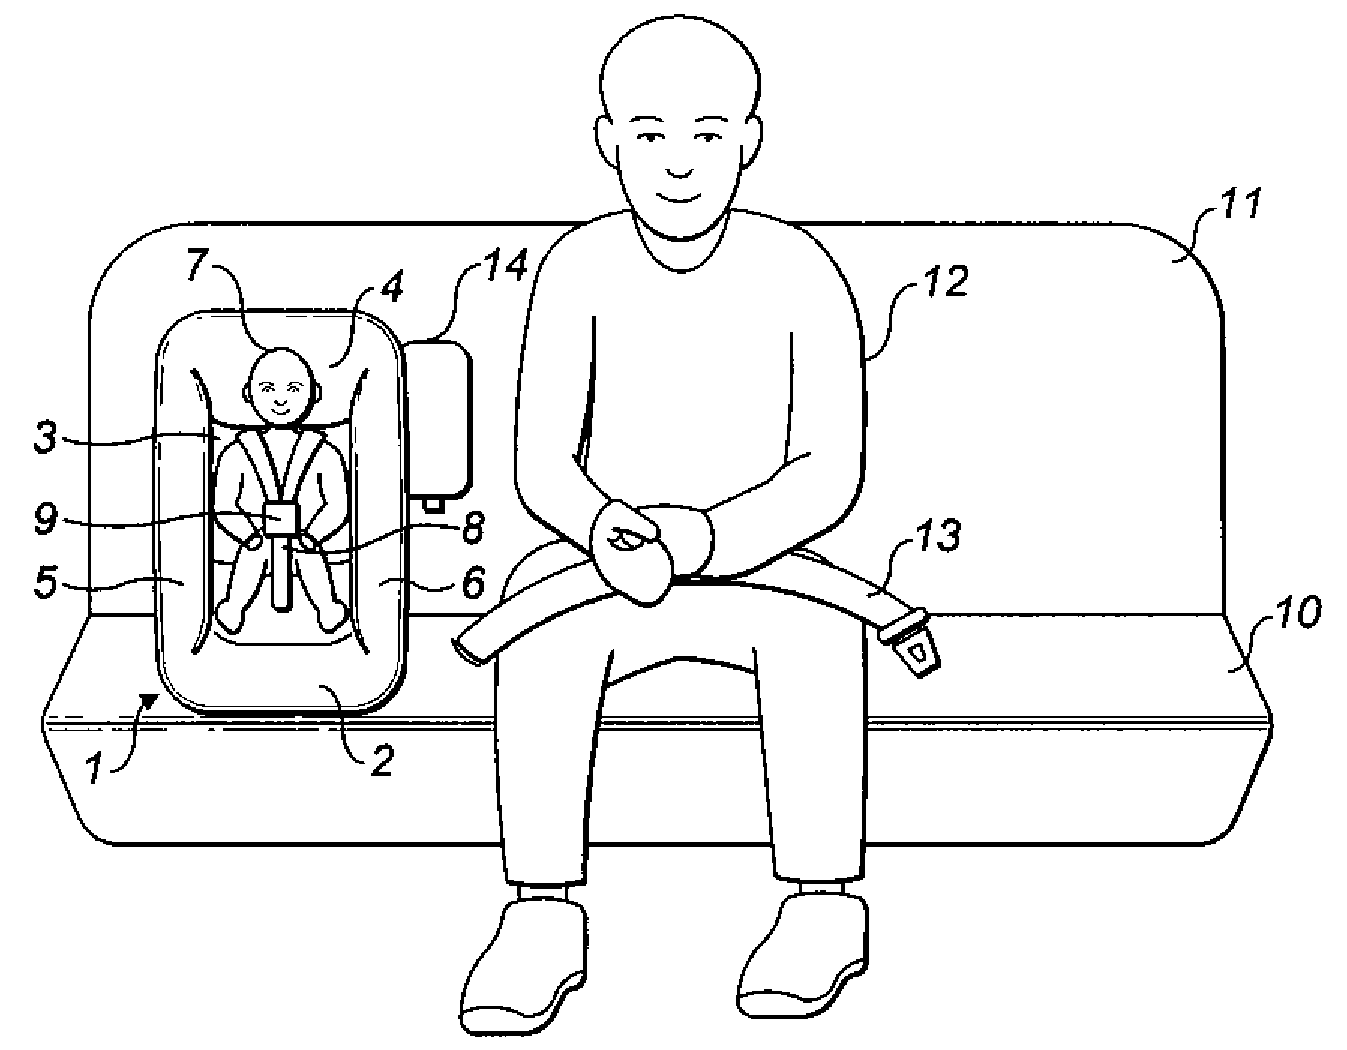 Child restraint apparatus for vehicle